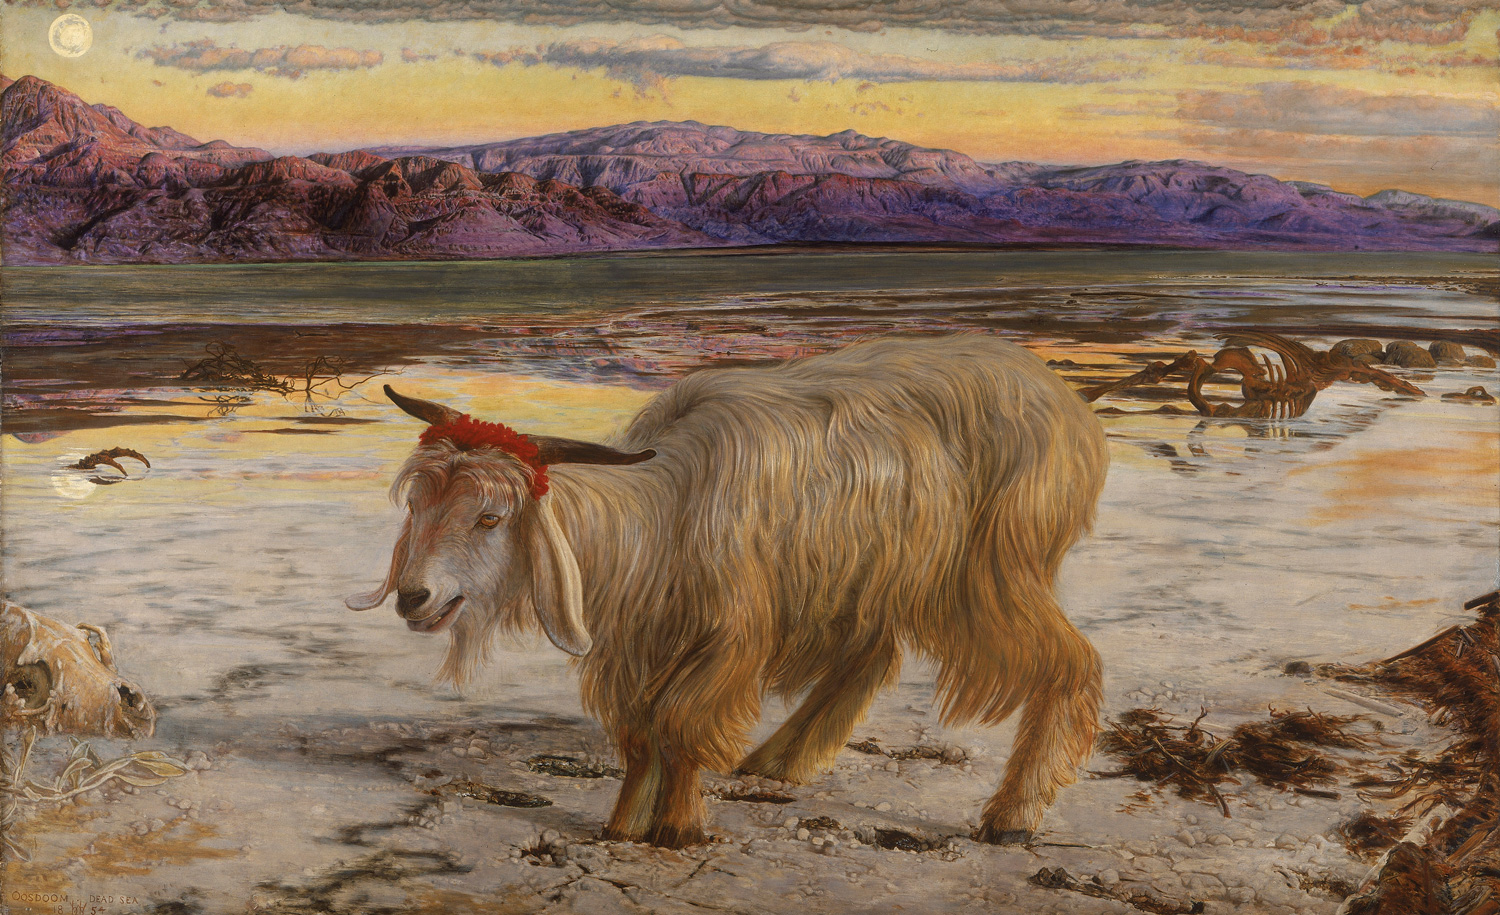 From The Scapegoat, 1854, by William Holman Hunt. Wikipedia.
